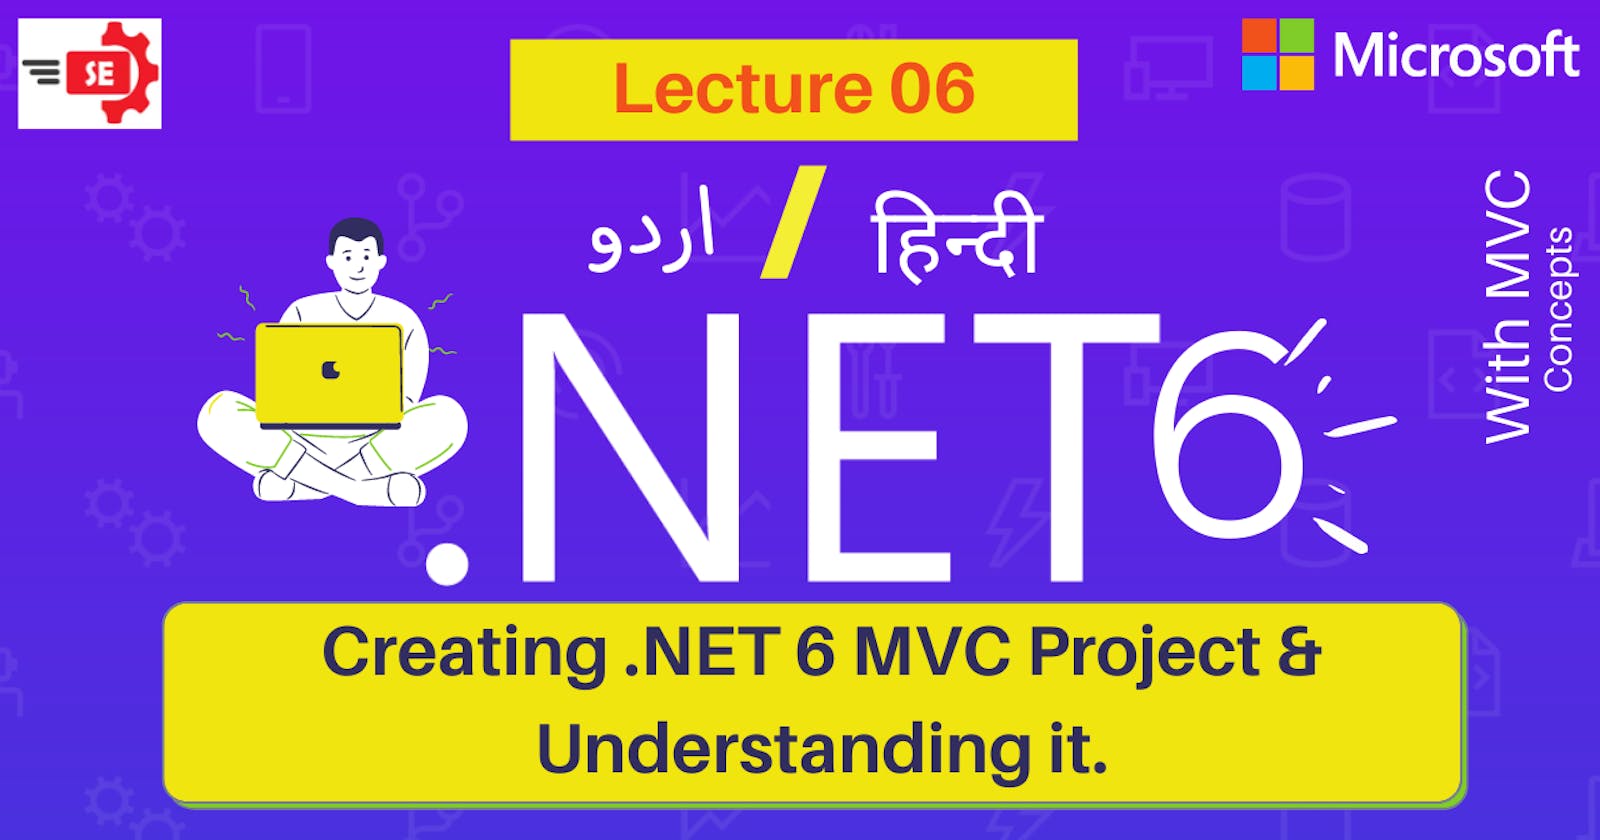 Creating .NET 6 MVC Project in Visual Studio | Lecture 6